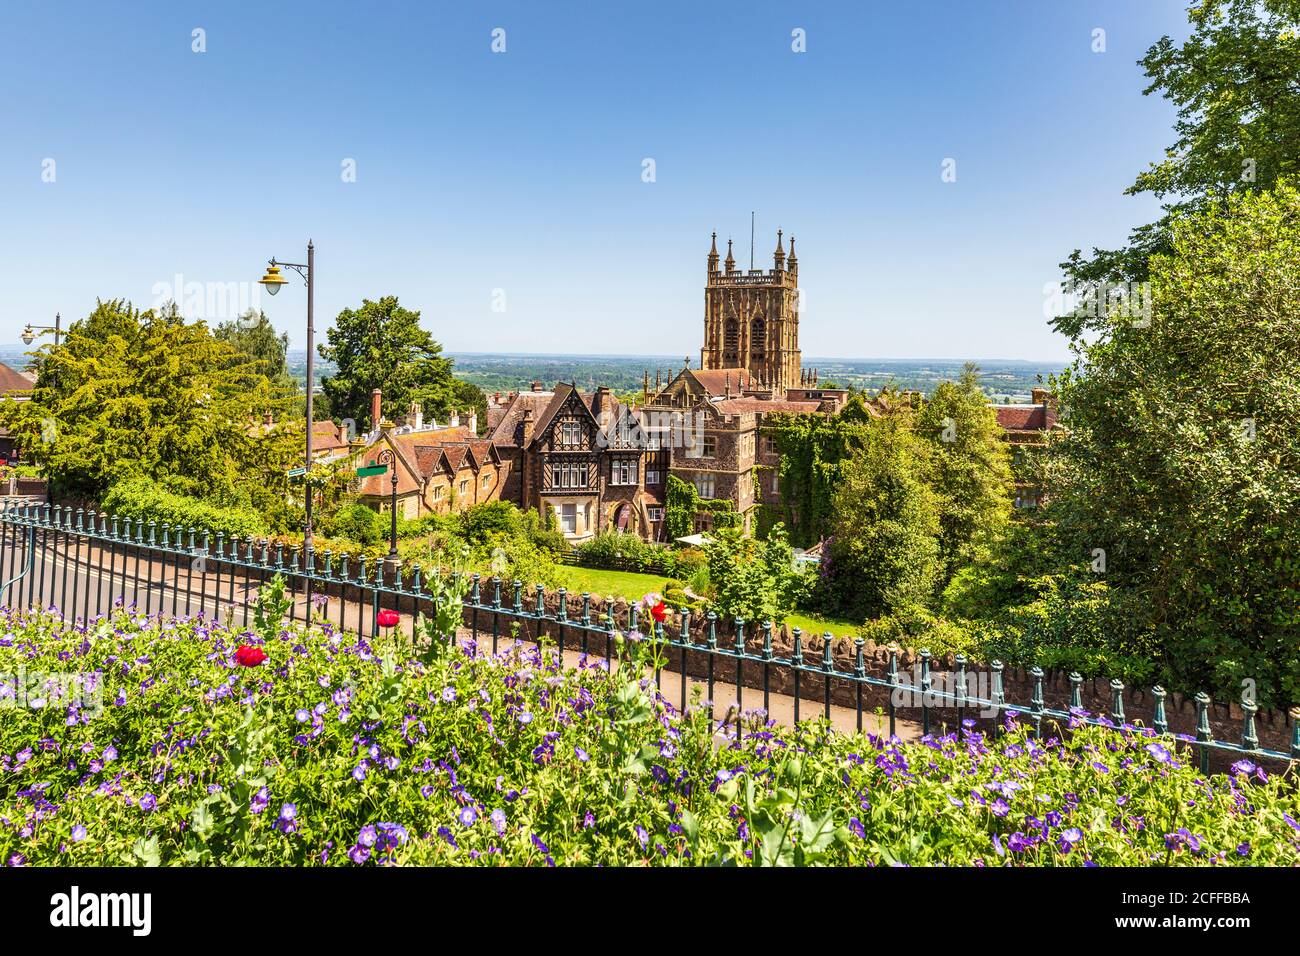 The Abbey Hotel and Bell Tower of Malvern Priory from the Rose Gardens in Great Malvern, Worcestershire, England Stock Photo